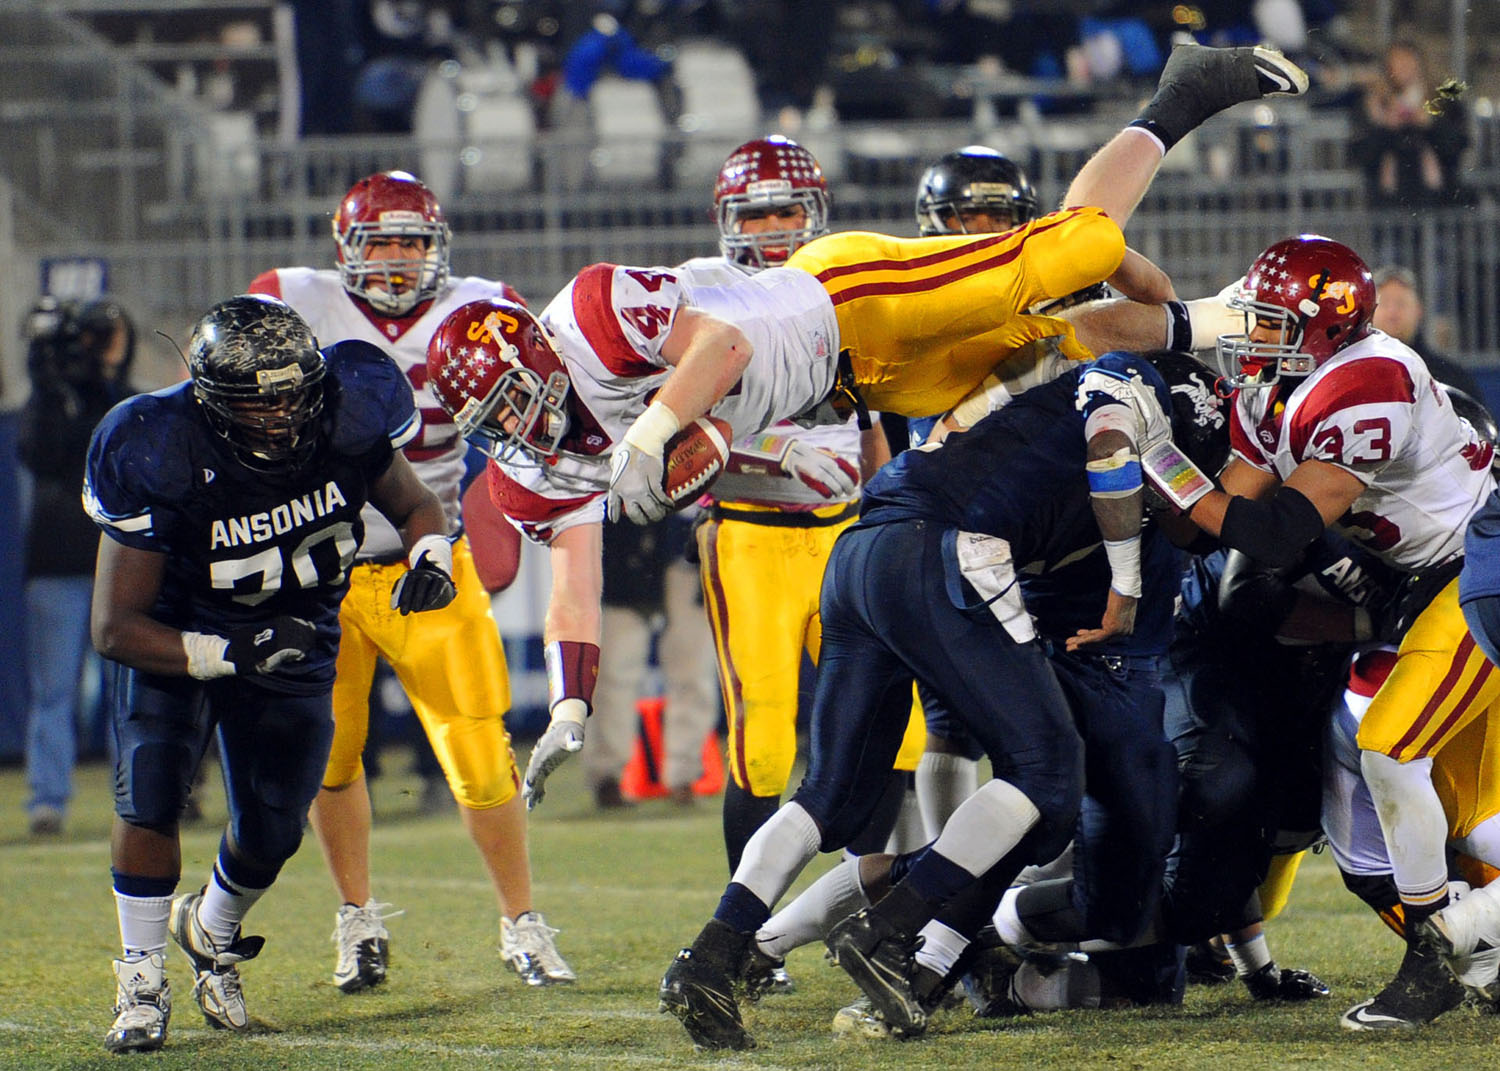  St. Joseph's Tyler Matakevich dives over Ansonia's defense to score a touchdown during the Class S State Football Championship game in East Hartford on December 11, 2010. 